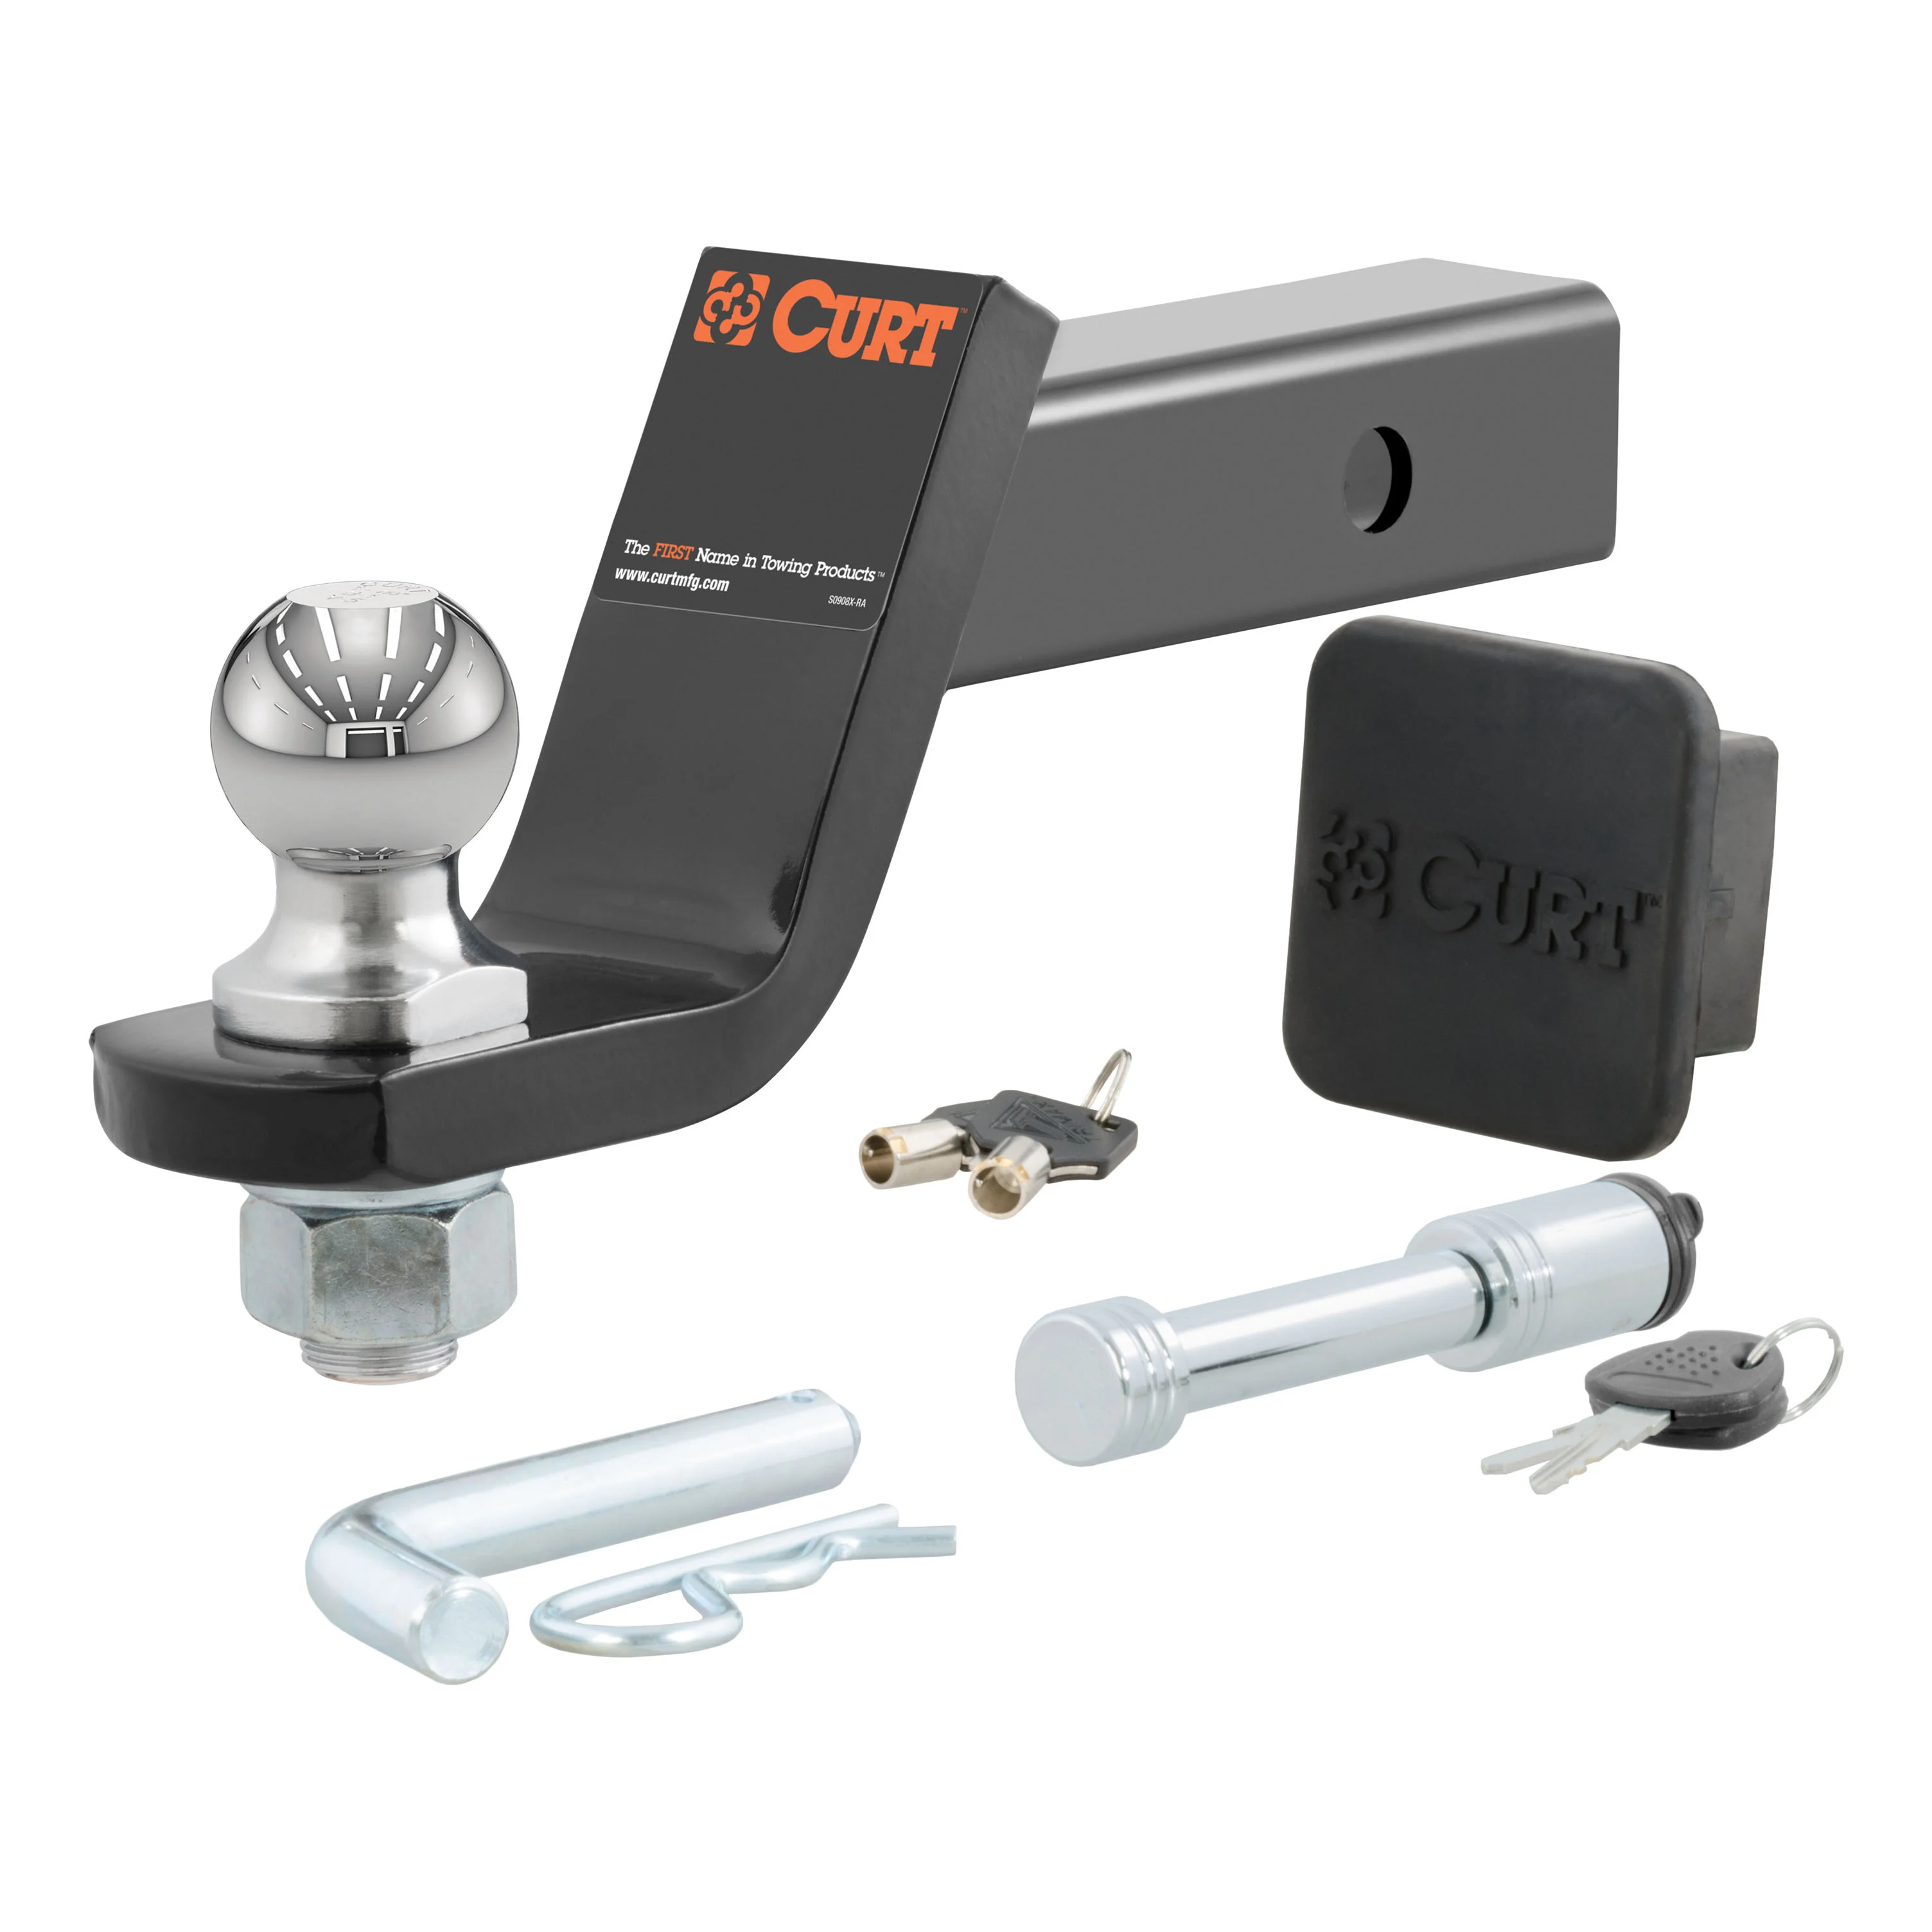 Curt Towing Starter Kit 2-inch ball, 2-inch shank with 4-inch drop